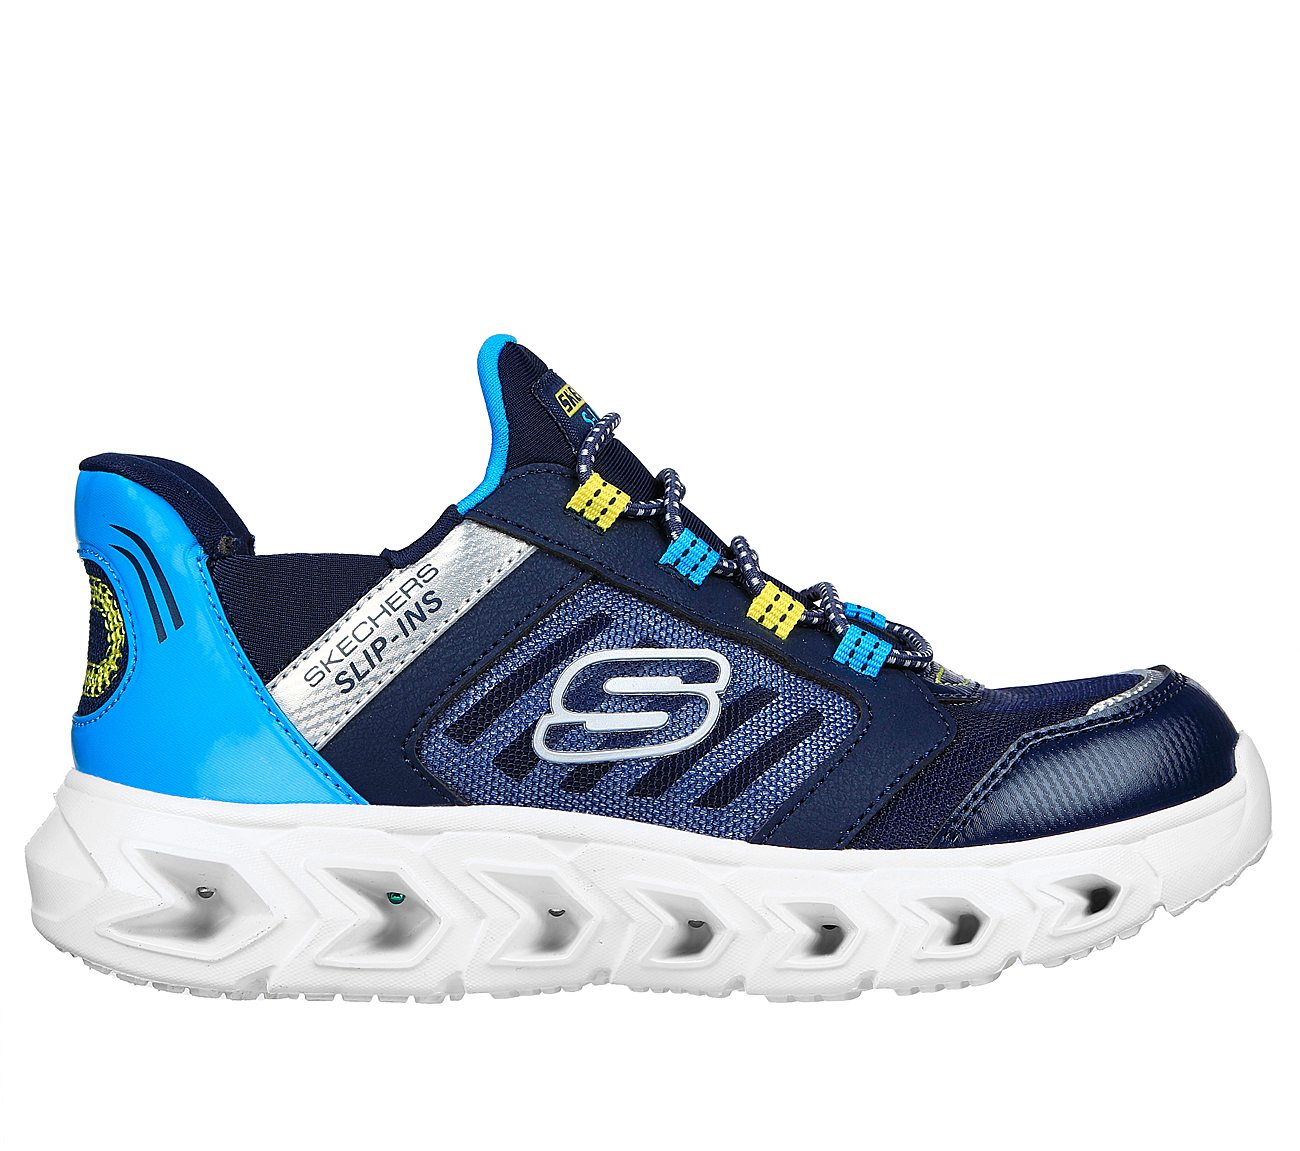 HYPNO-FLASH 2.0 - ODELUX, NAVY/BLUE Footwear Lateral View